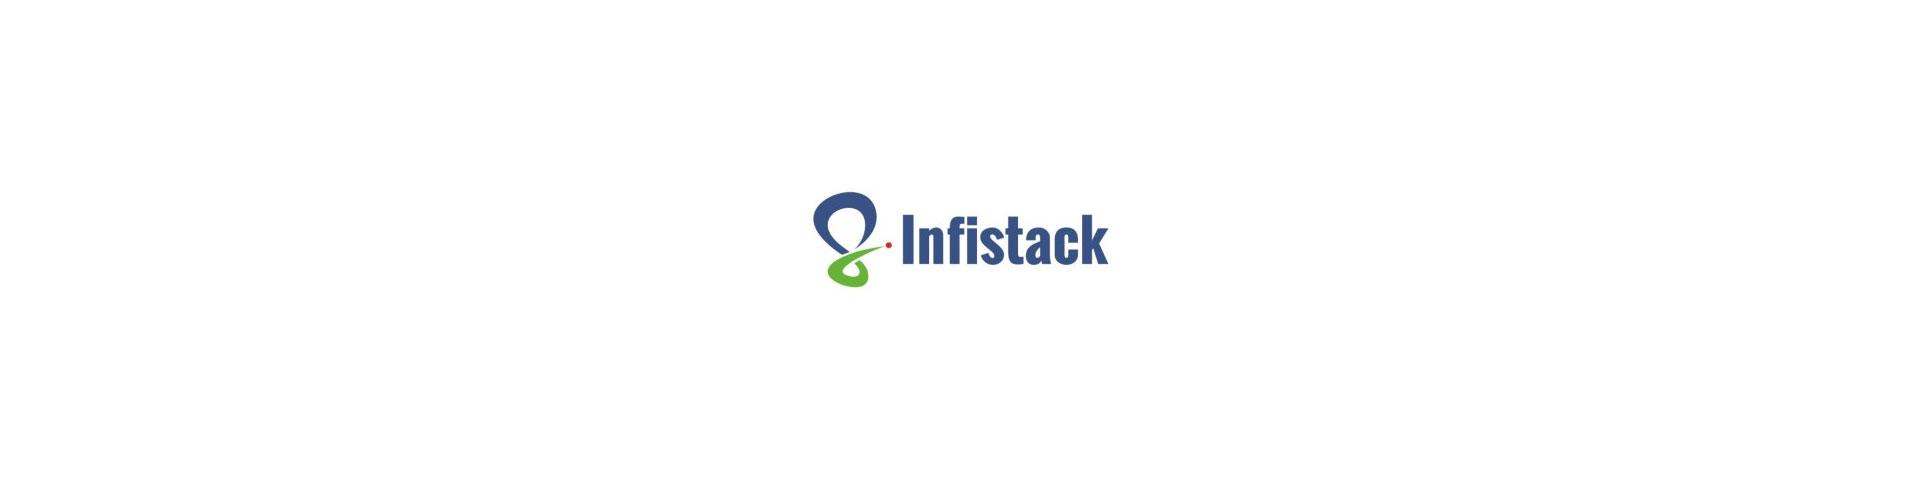 Infistack